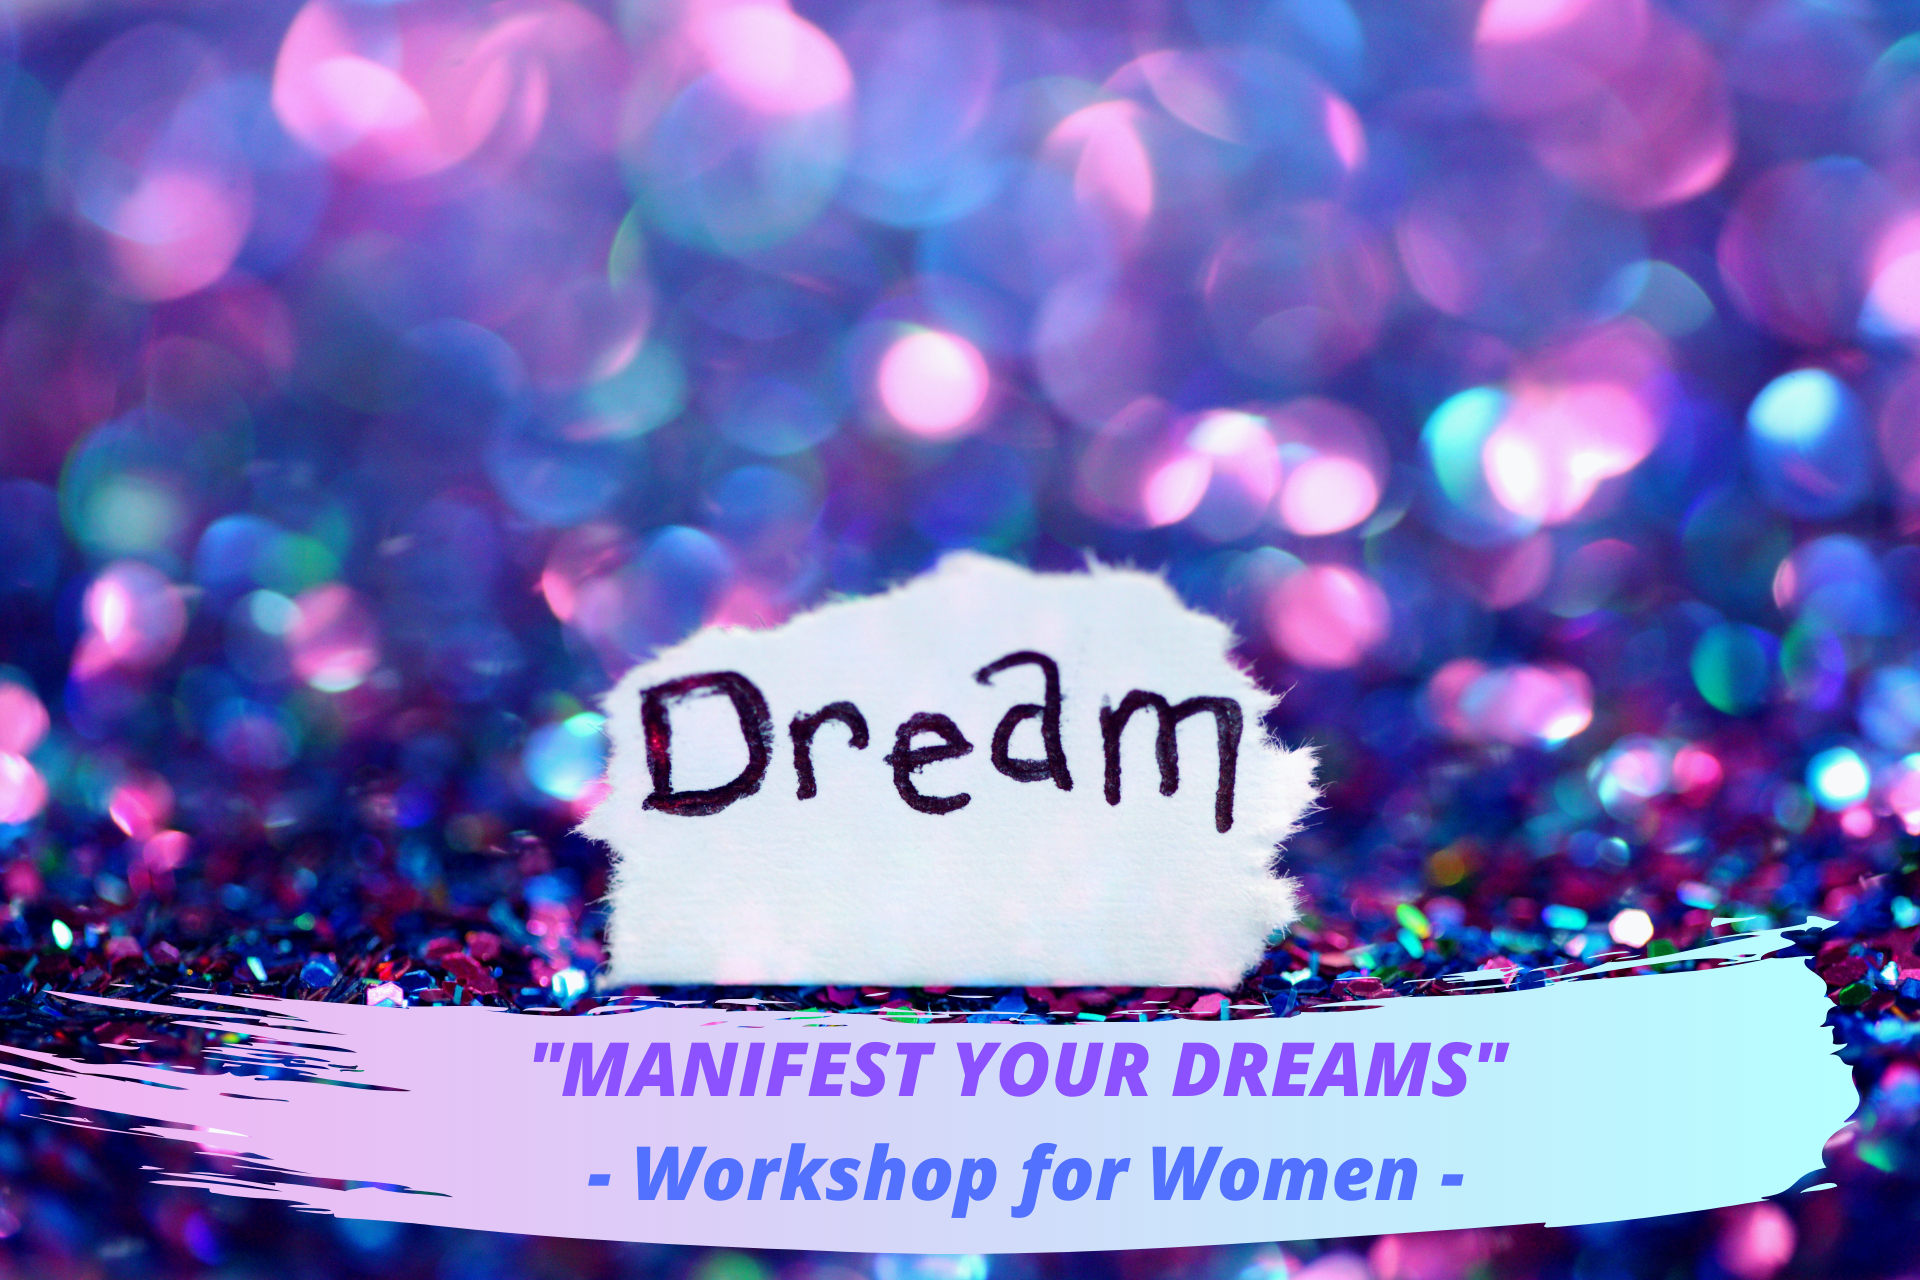 MANIFEST YOUR DREAMS - Workshop for Women - Vision Board creation -